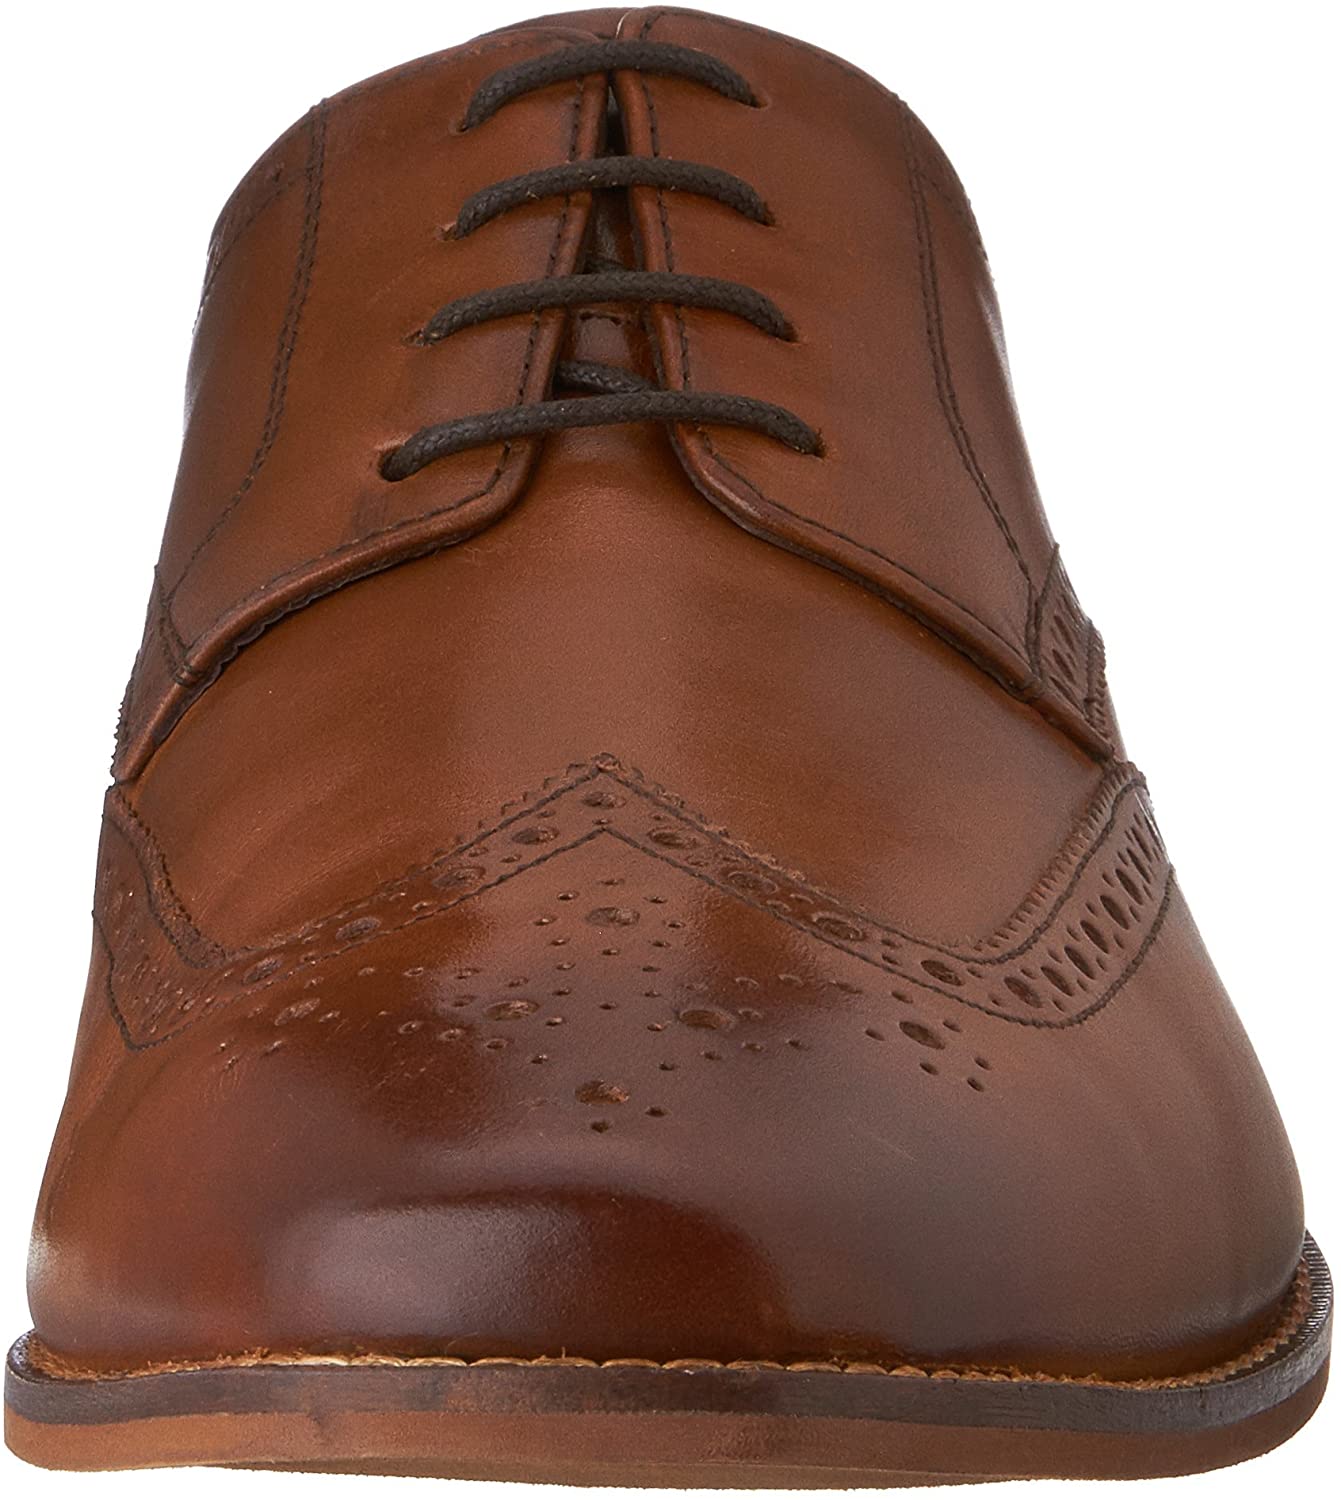 Mens Castellano Wing Leather Wing Tip Derby Shoes - image 2 of 8